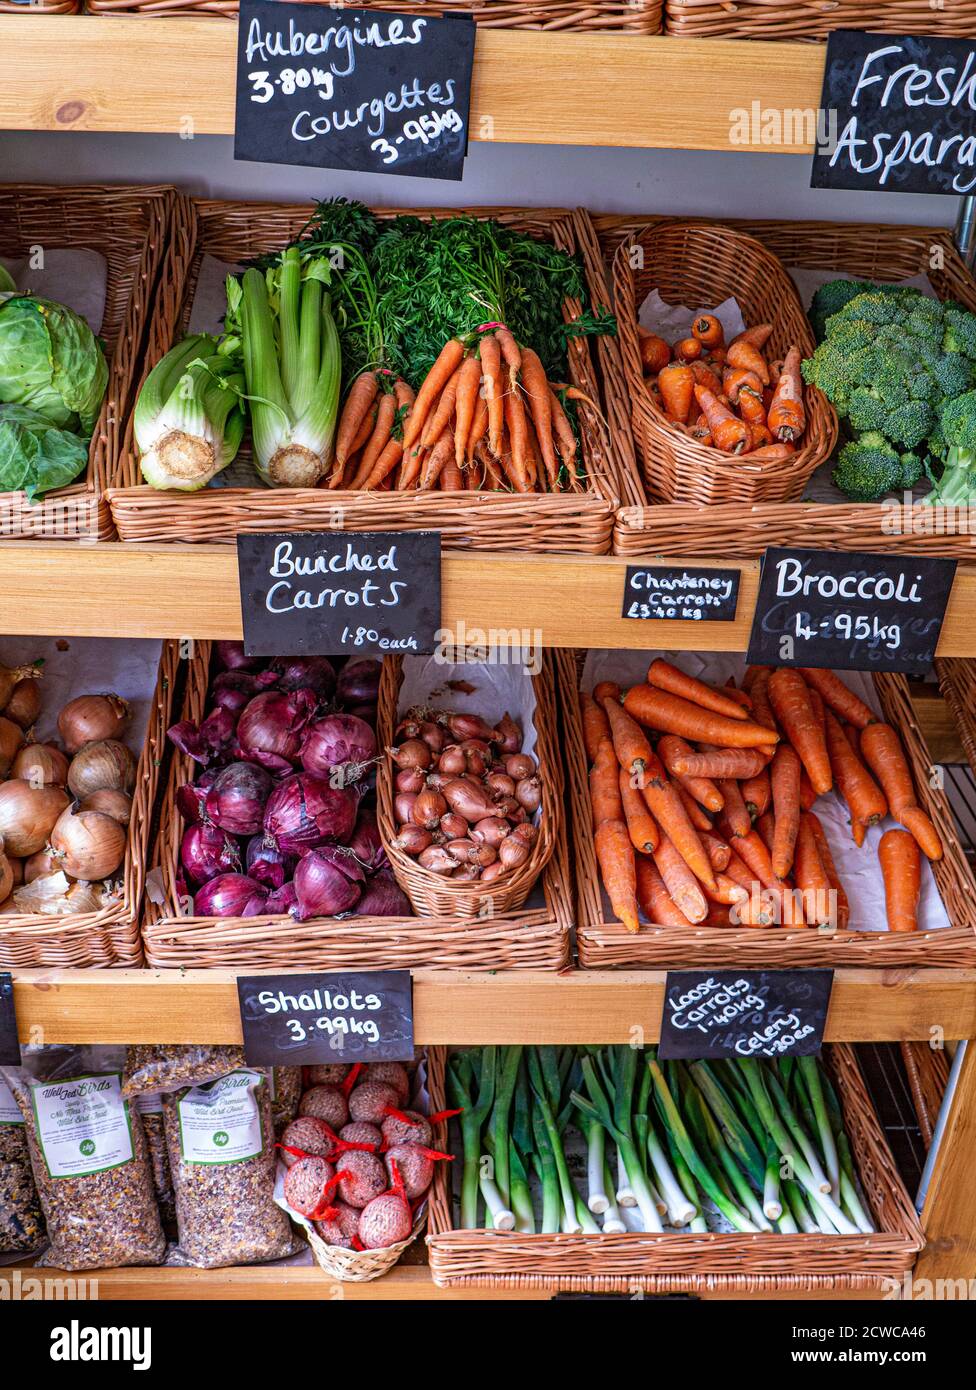 FARM SHOP LOCAL UK PRODUCE BLACKBOARD PRICE LABELS Traditional high street produce farm shop interior with fresh local fruit and vegetables on sale in Kilos blackboards Stow on the Wold Cotswolds UK Stock Photo